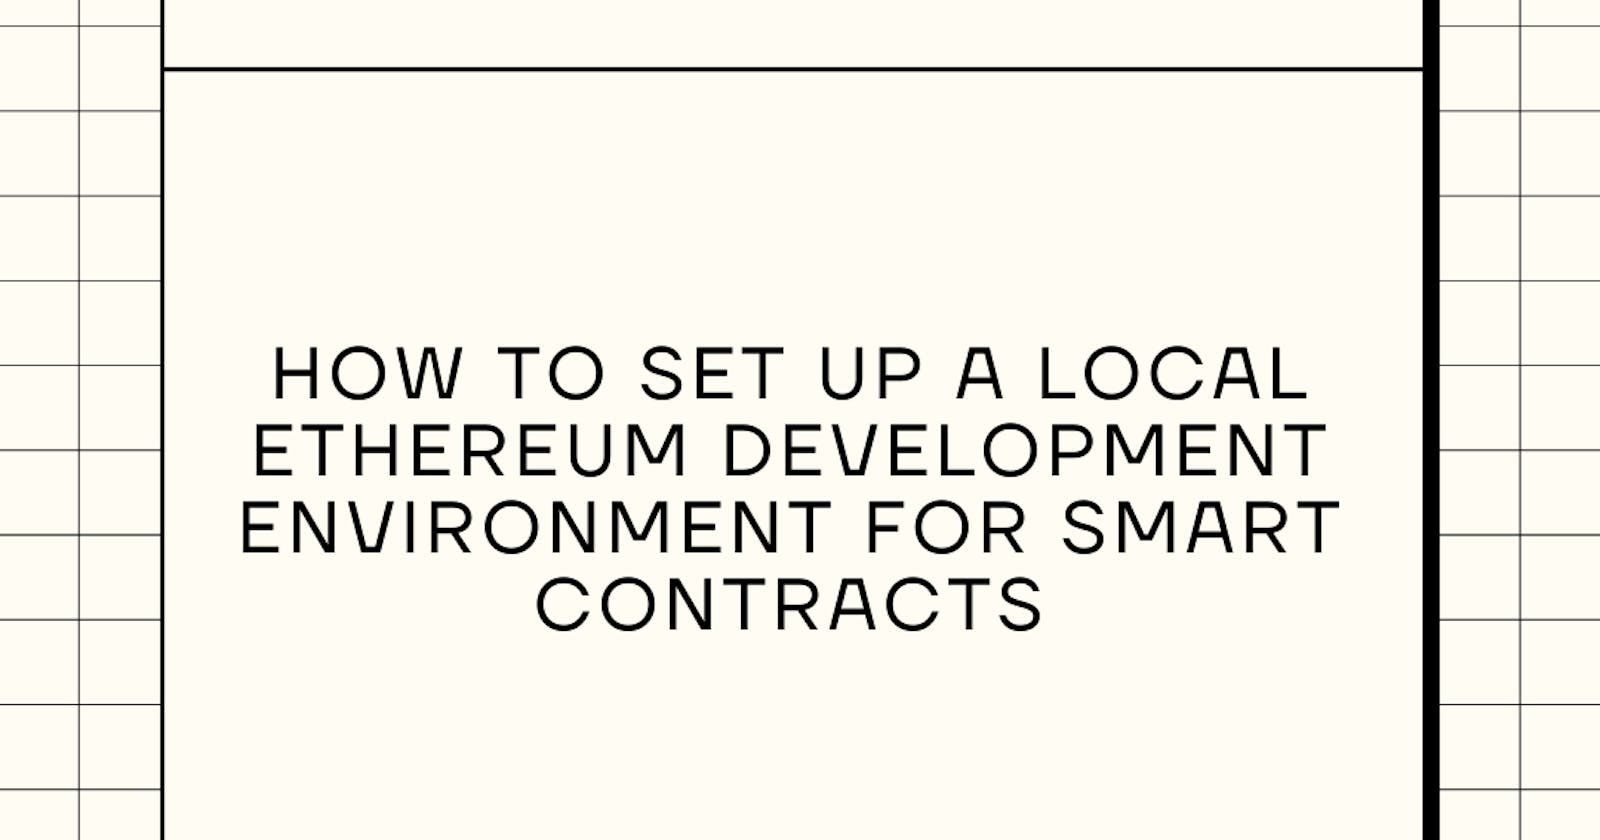 How to Set Up a Local Ethereum Development Environment for Smart Contracts